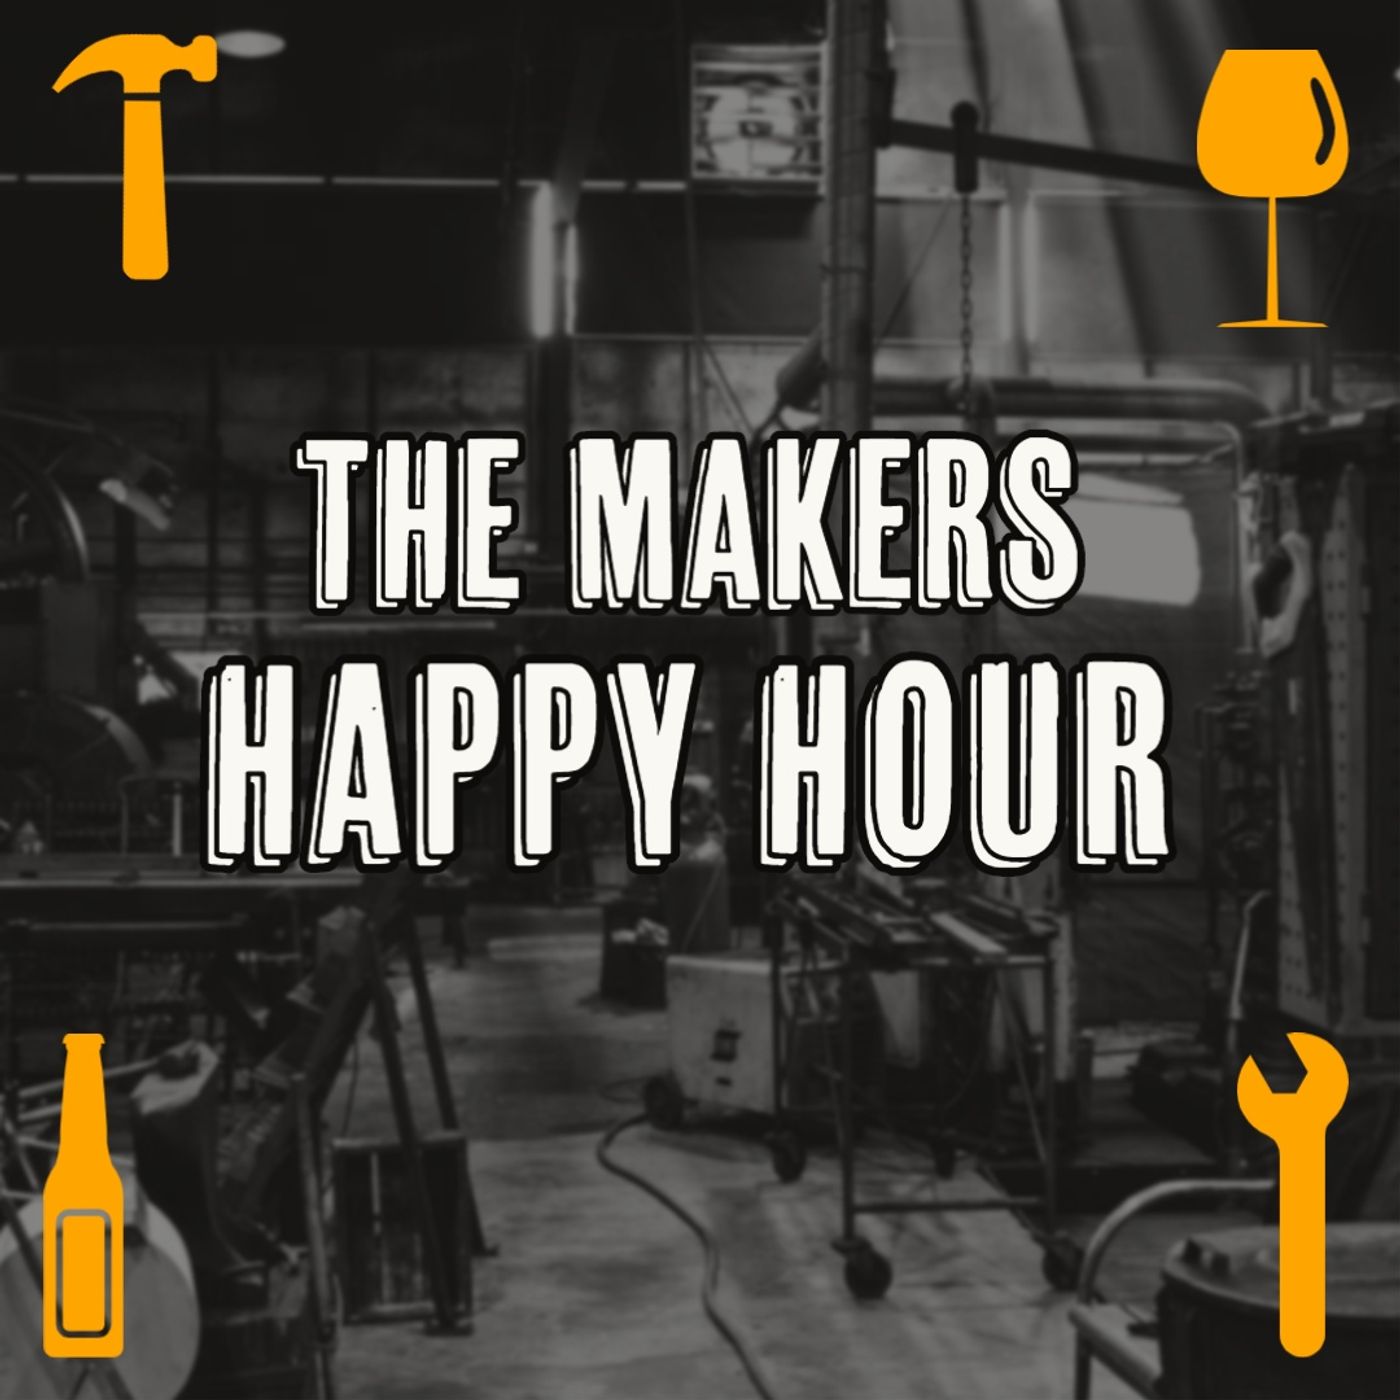 The Maker’s Happy Hour